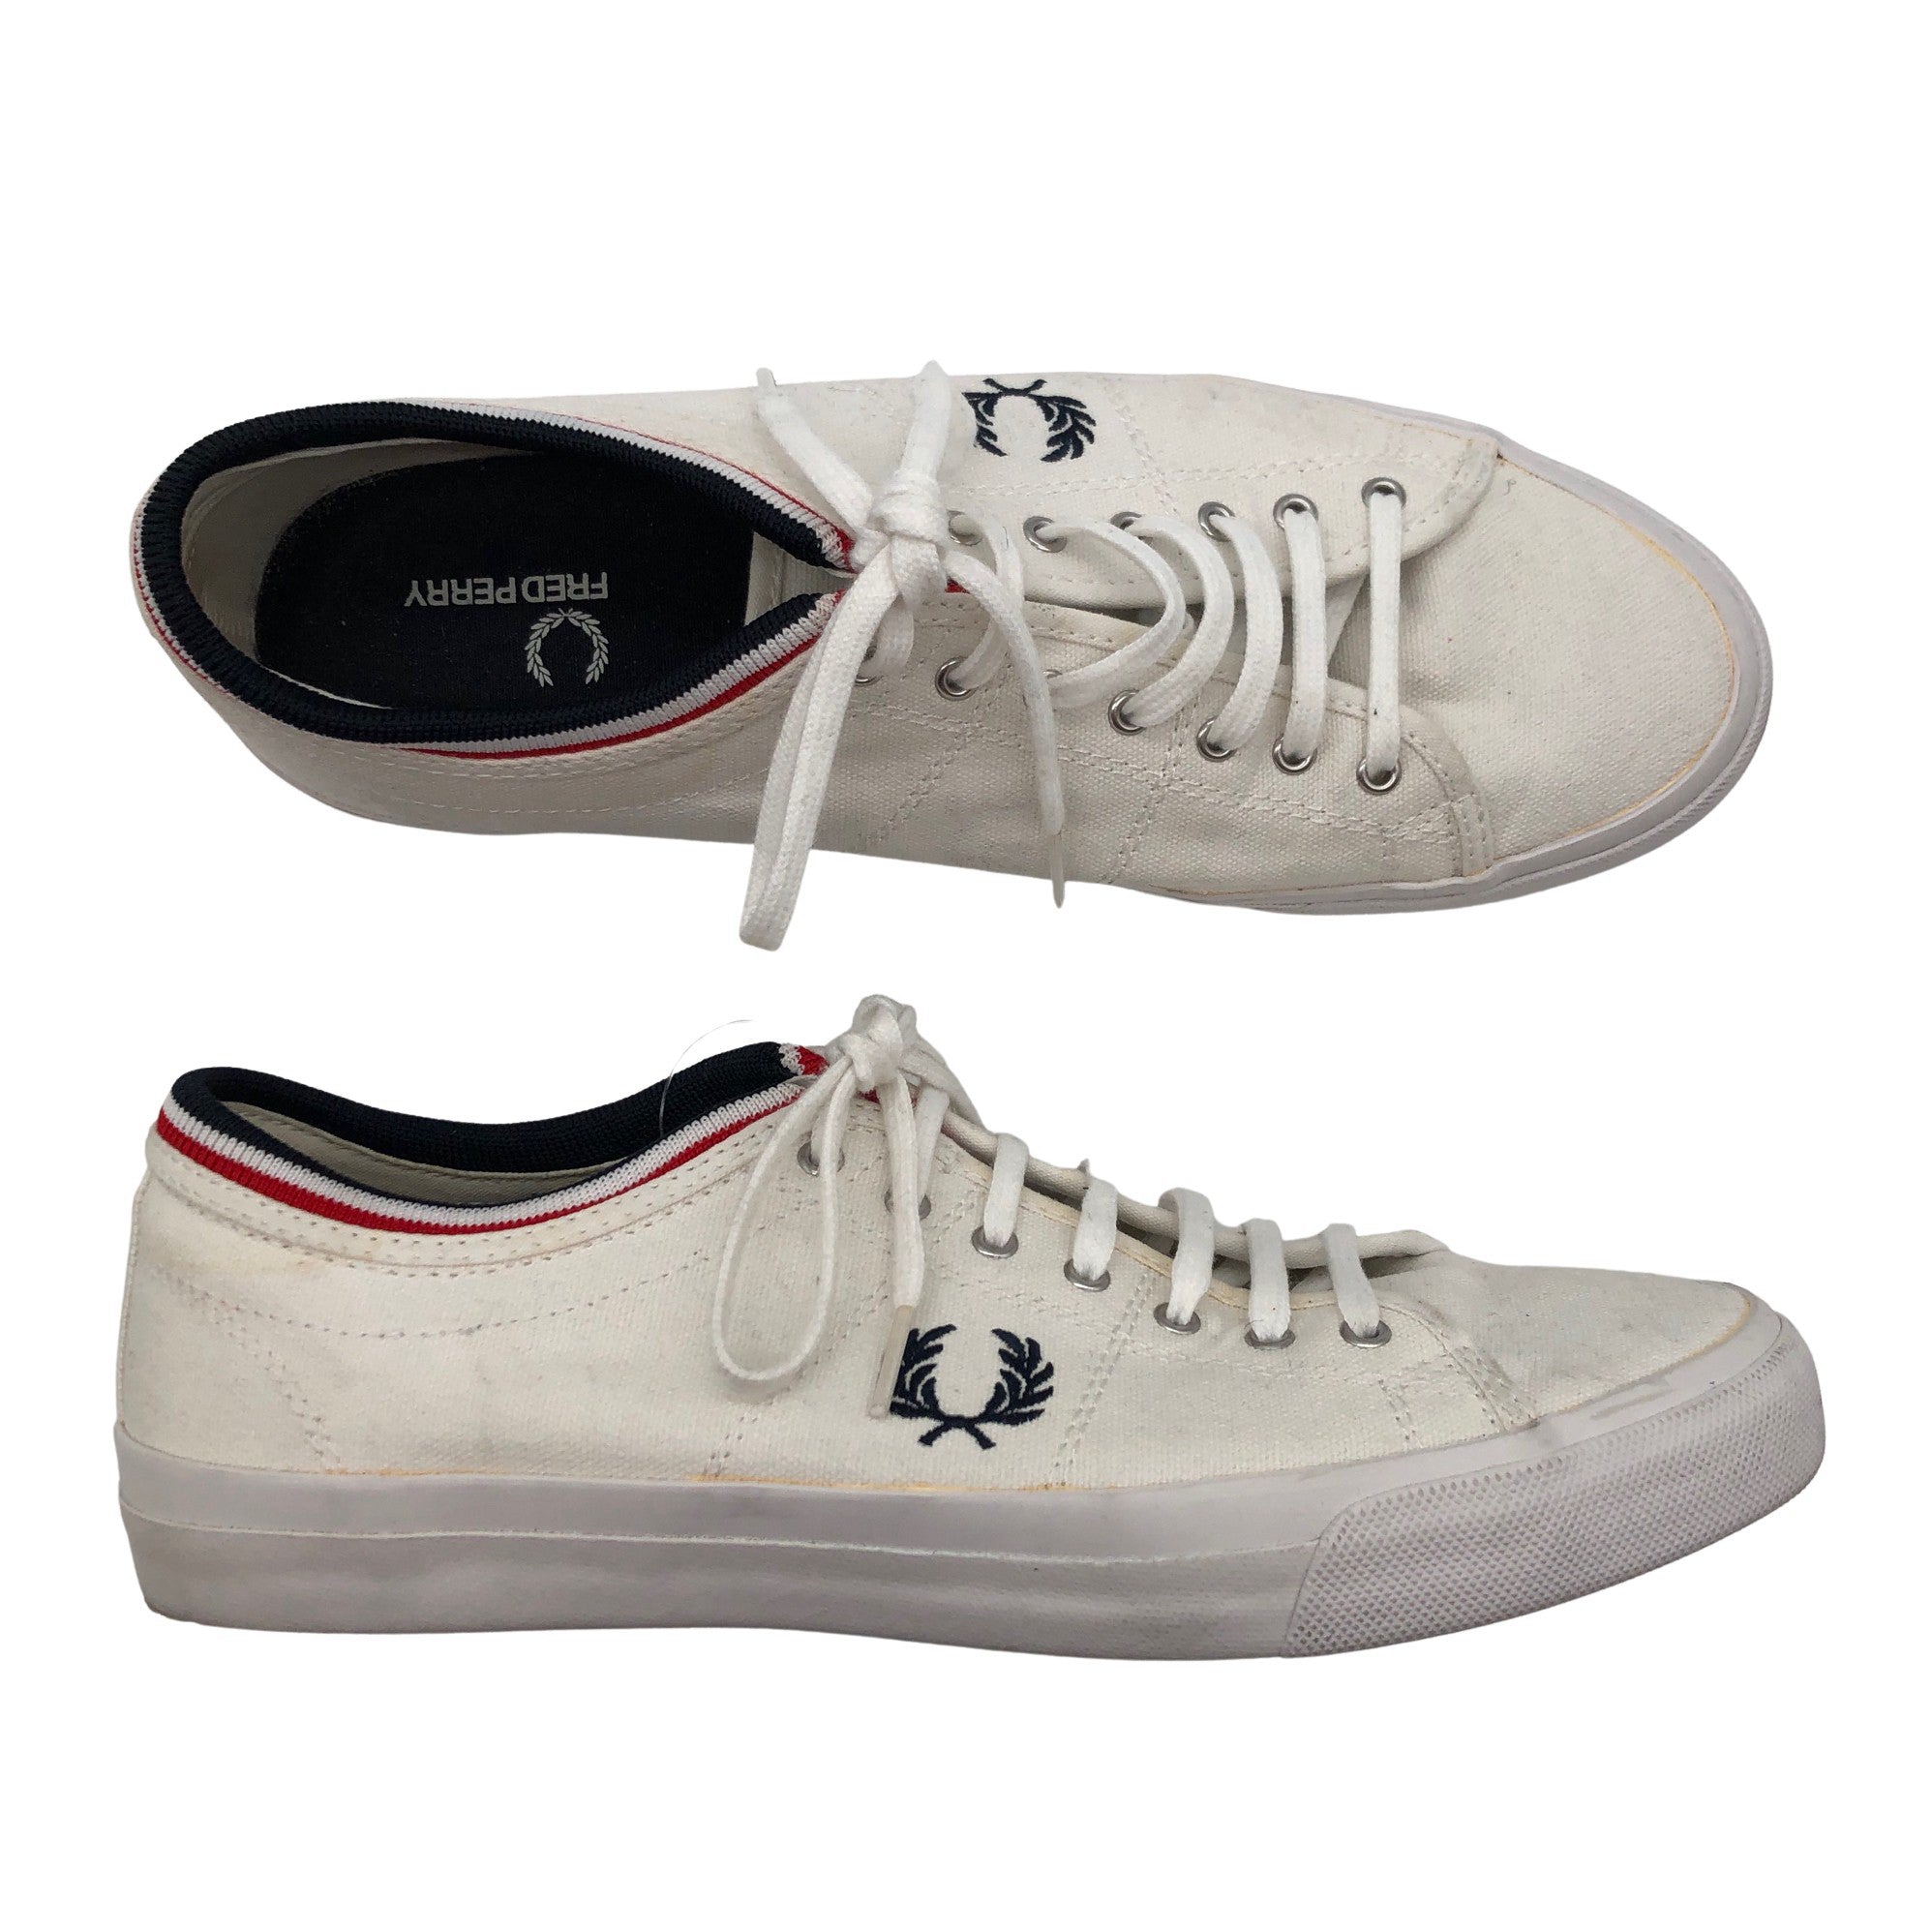 Soms Stewart Island Daarom Men's Fred Perry Casual sneakers, size 43 (White) | Emmy